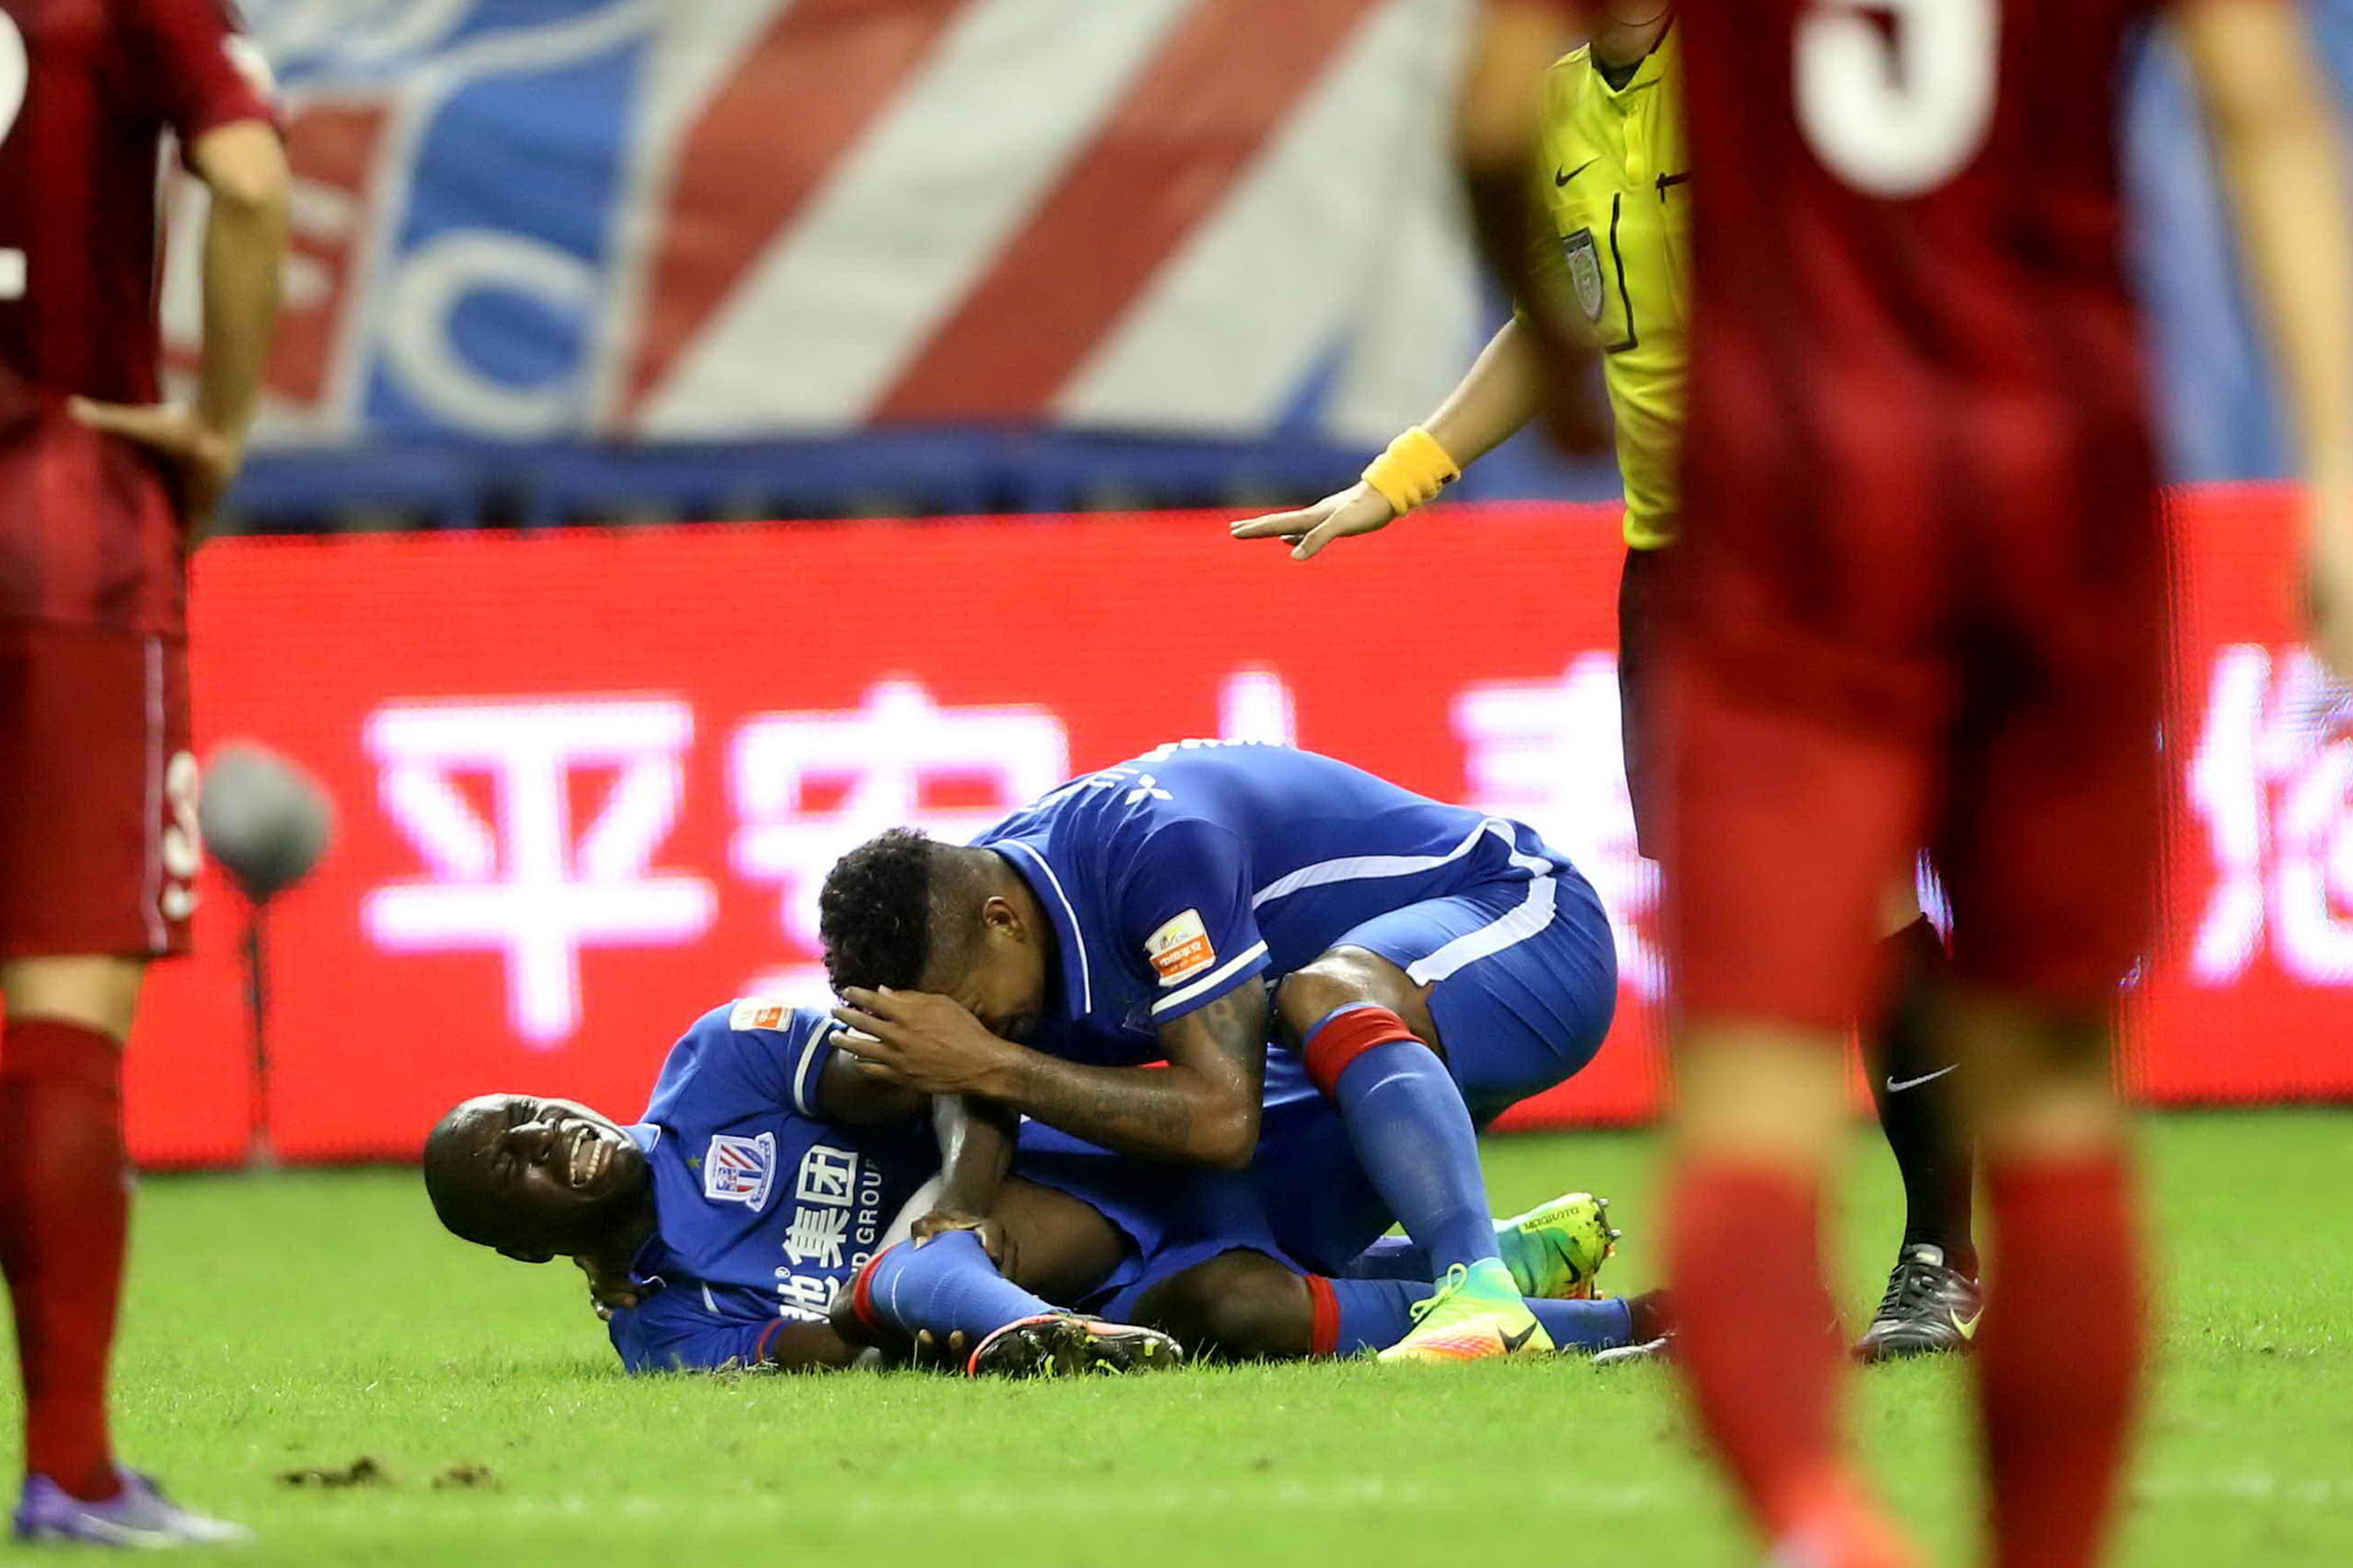 This photo taken on July 17, 2016 shows Demba Ba (L) of Shanghai Shenhua reacting after breaking his left leg during the 17th round football match of the Chinese Super League against Shanghai SIPG in Shanghai. 
Former Chelsea striker Demba Ba suffered a horror broken leg in the Shanghai derby at the weekend, with his coach warning the injury could end the 31-year-old's playing career. / AFP / STR / China OUT        (Photo credit should read STR/AFP/Getty Images)